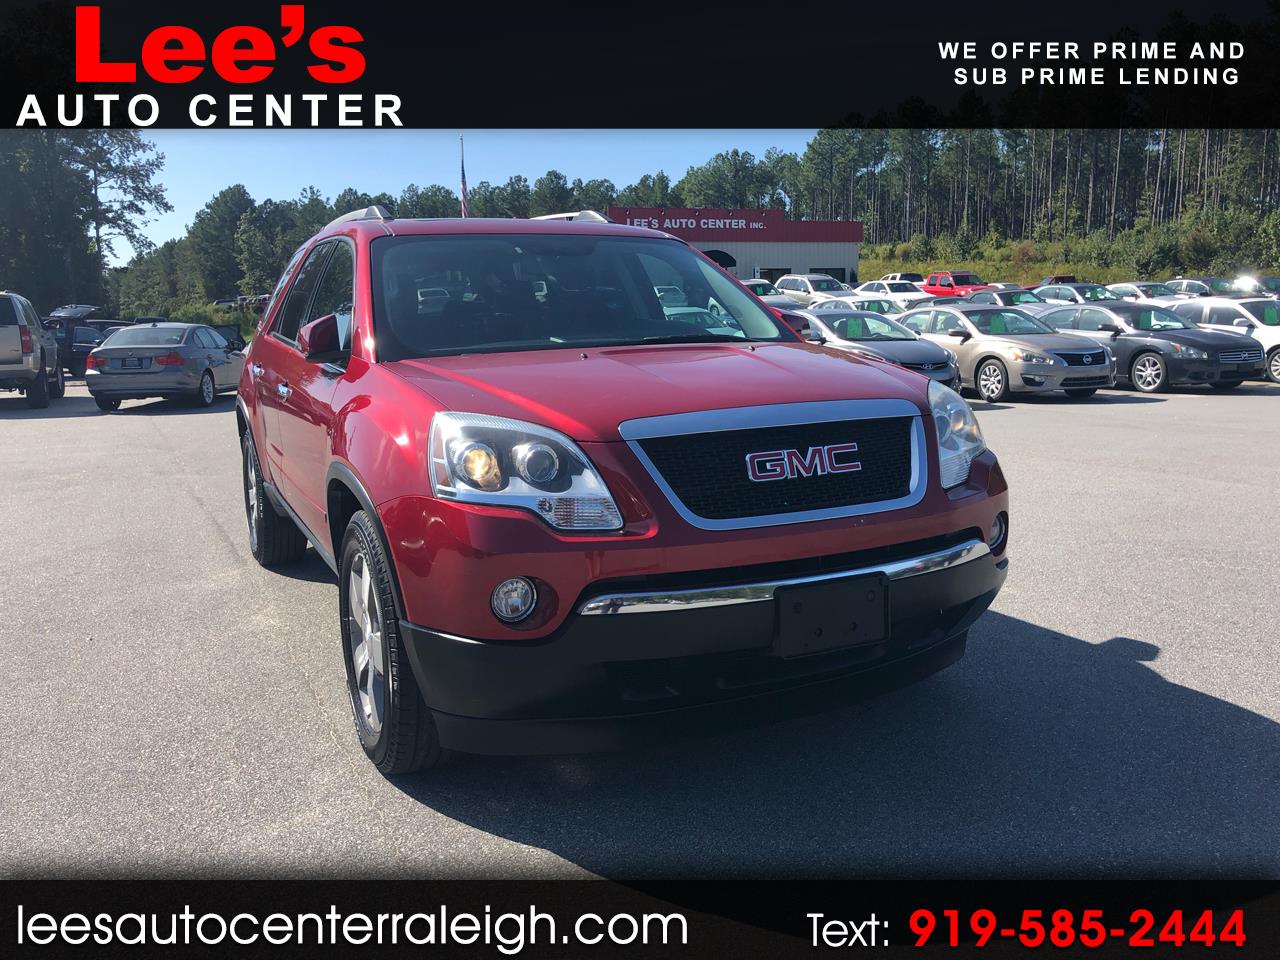 Used 2012 Gmc Acadia Slt1 Carfax 1 Owner For Sale In Raleigh Nc